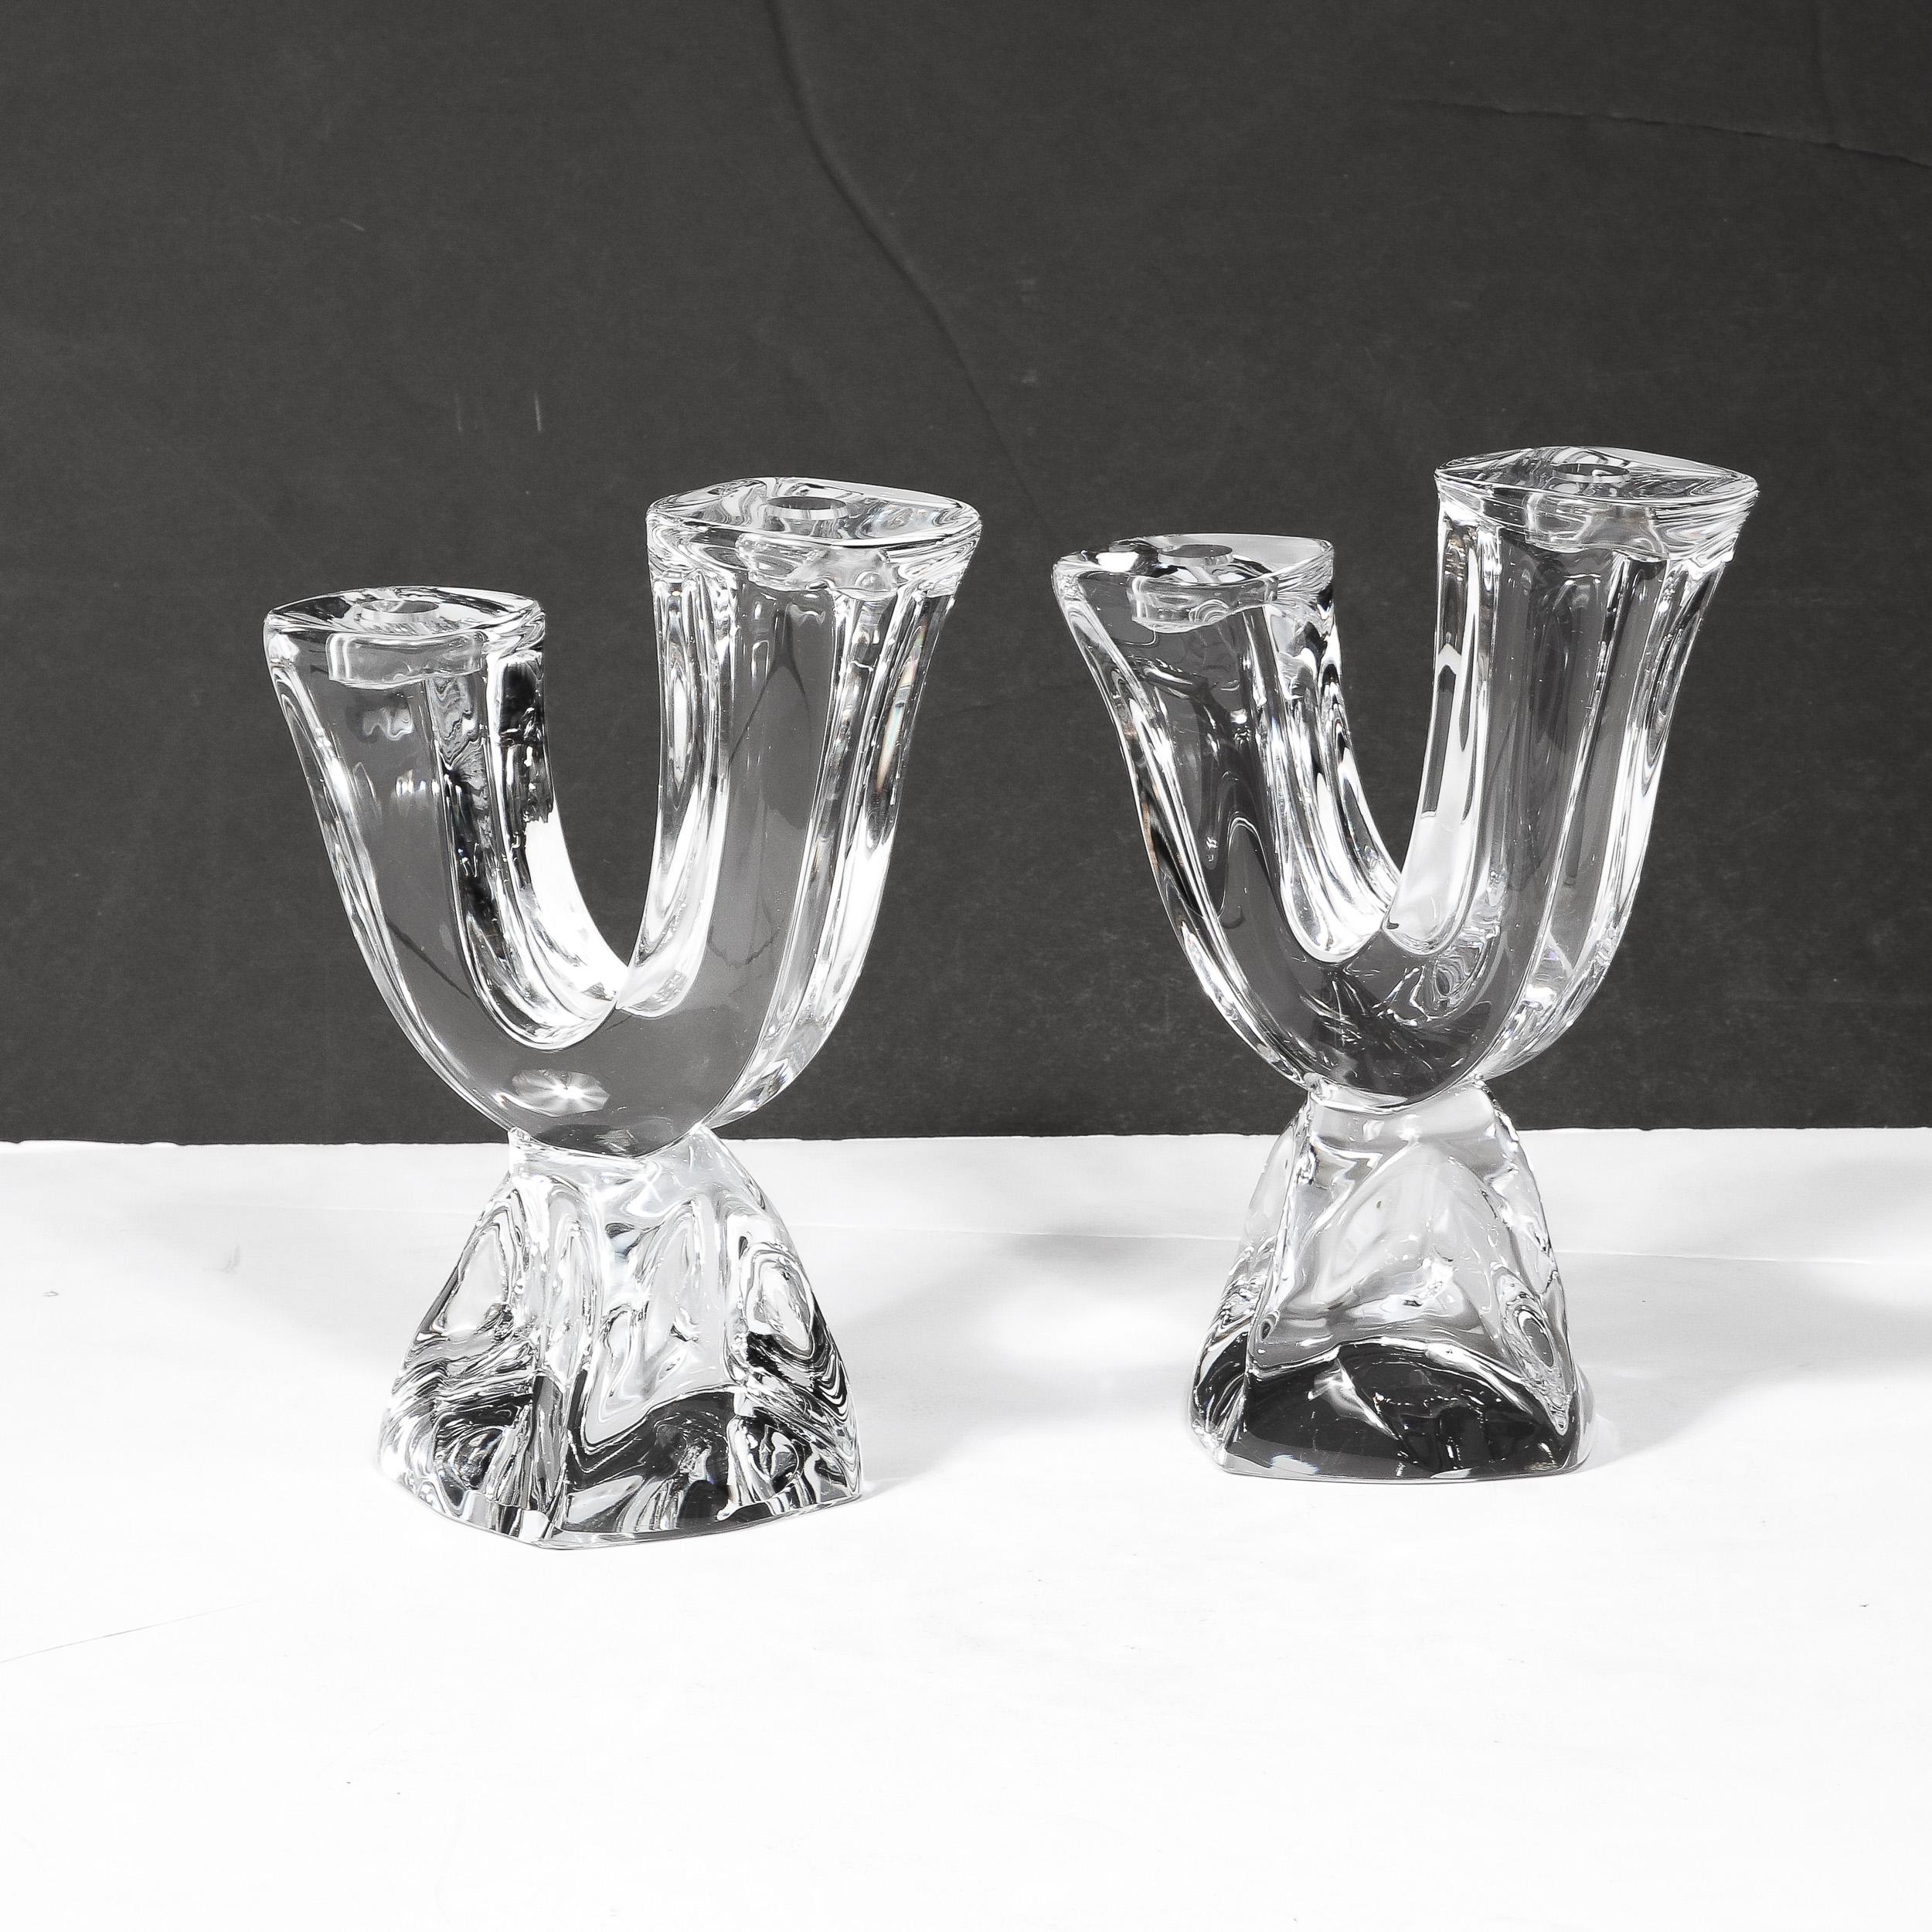 This bold and sumptuous pair of Mid-Century Modernist Crystal Candle Holders were fabricated by the esteemed art glass company Daum in Nancy, France Circa 1960. The exude a rare degree of elegant stability, a testament to the duality of weight and